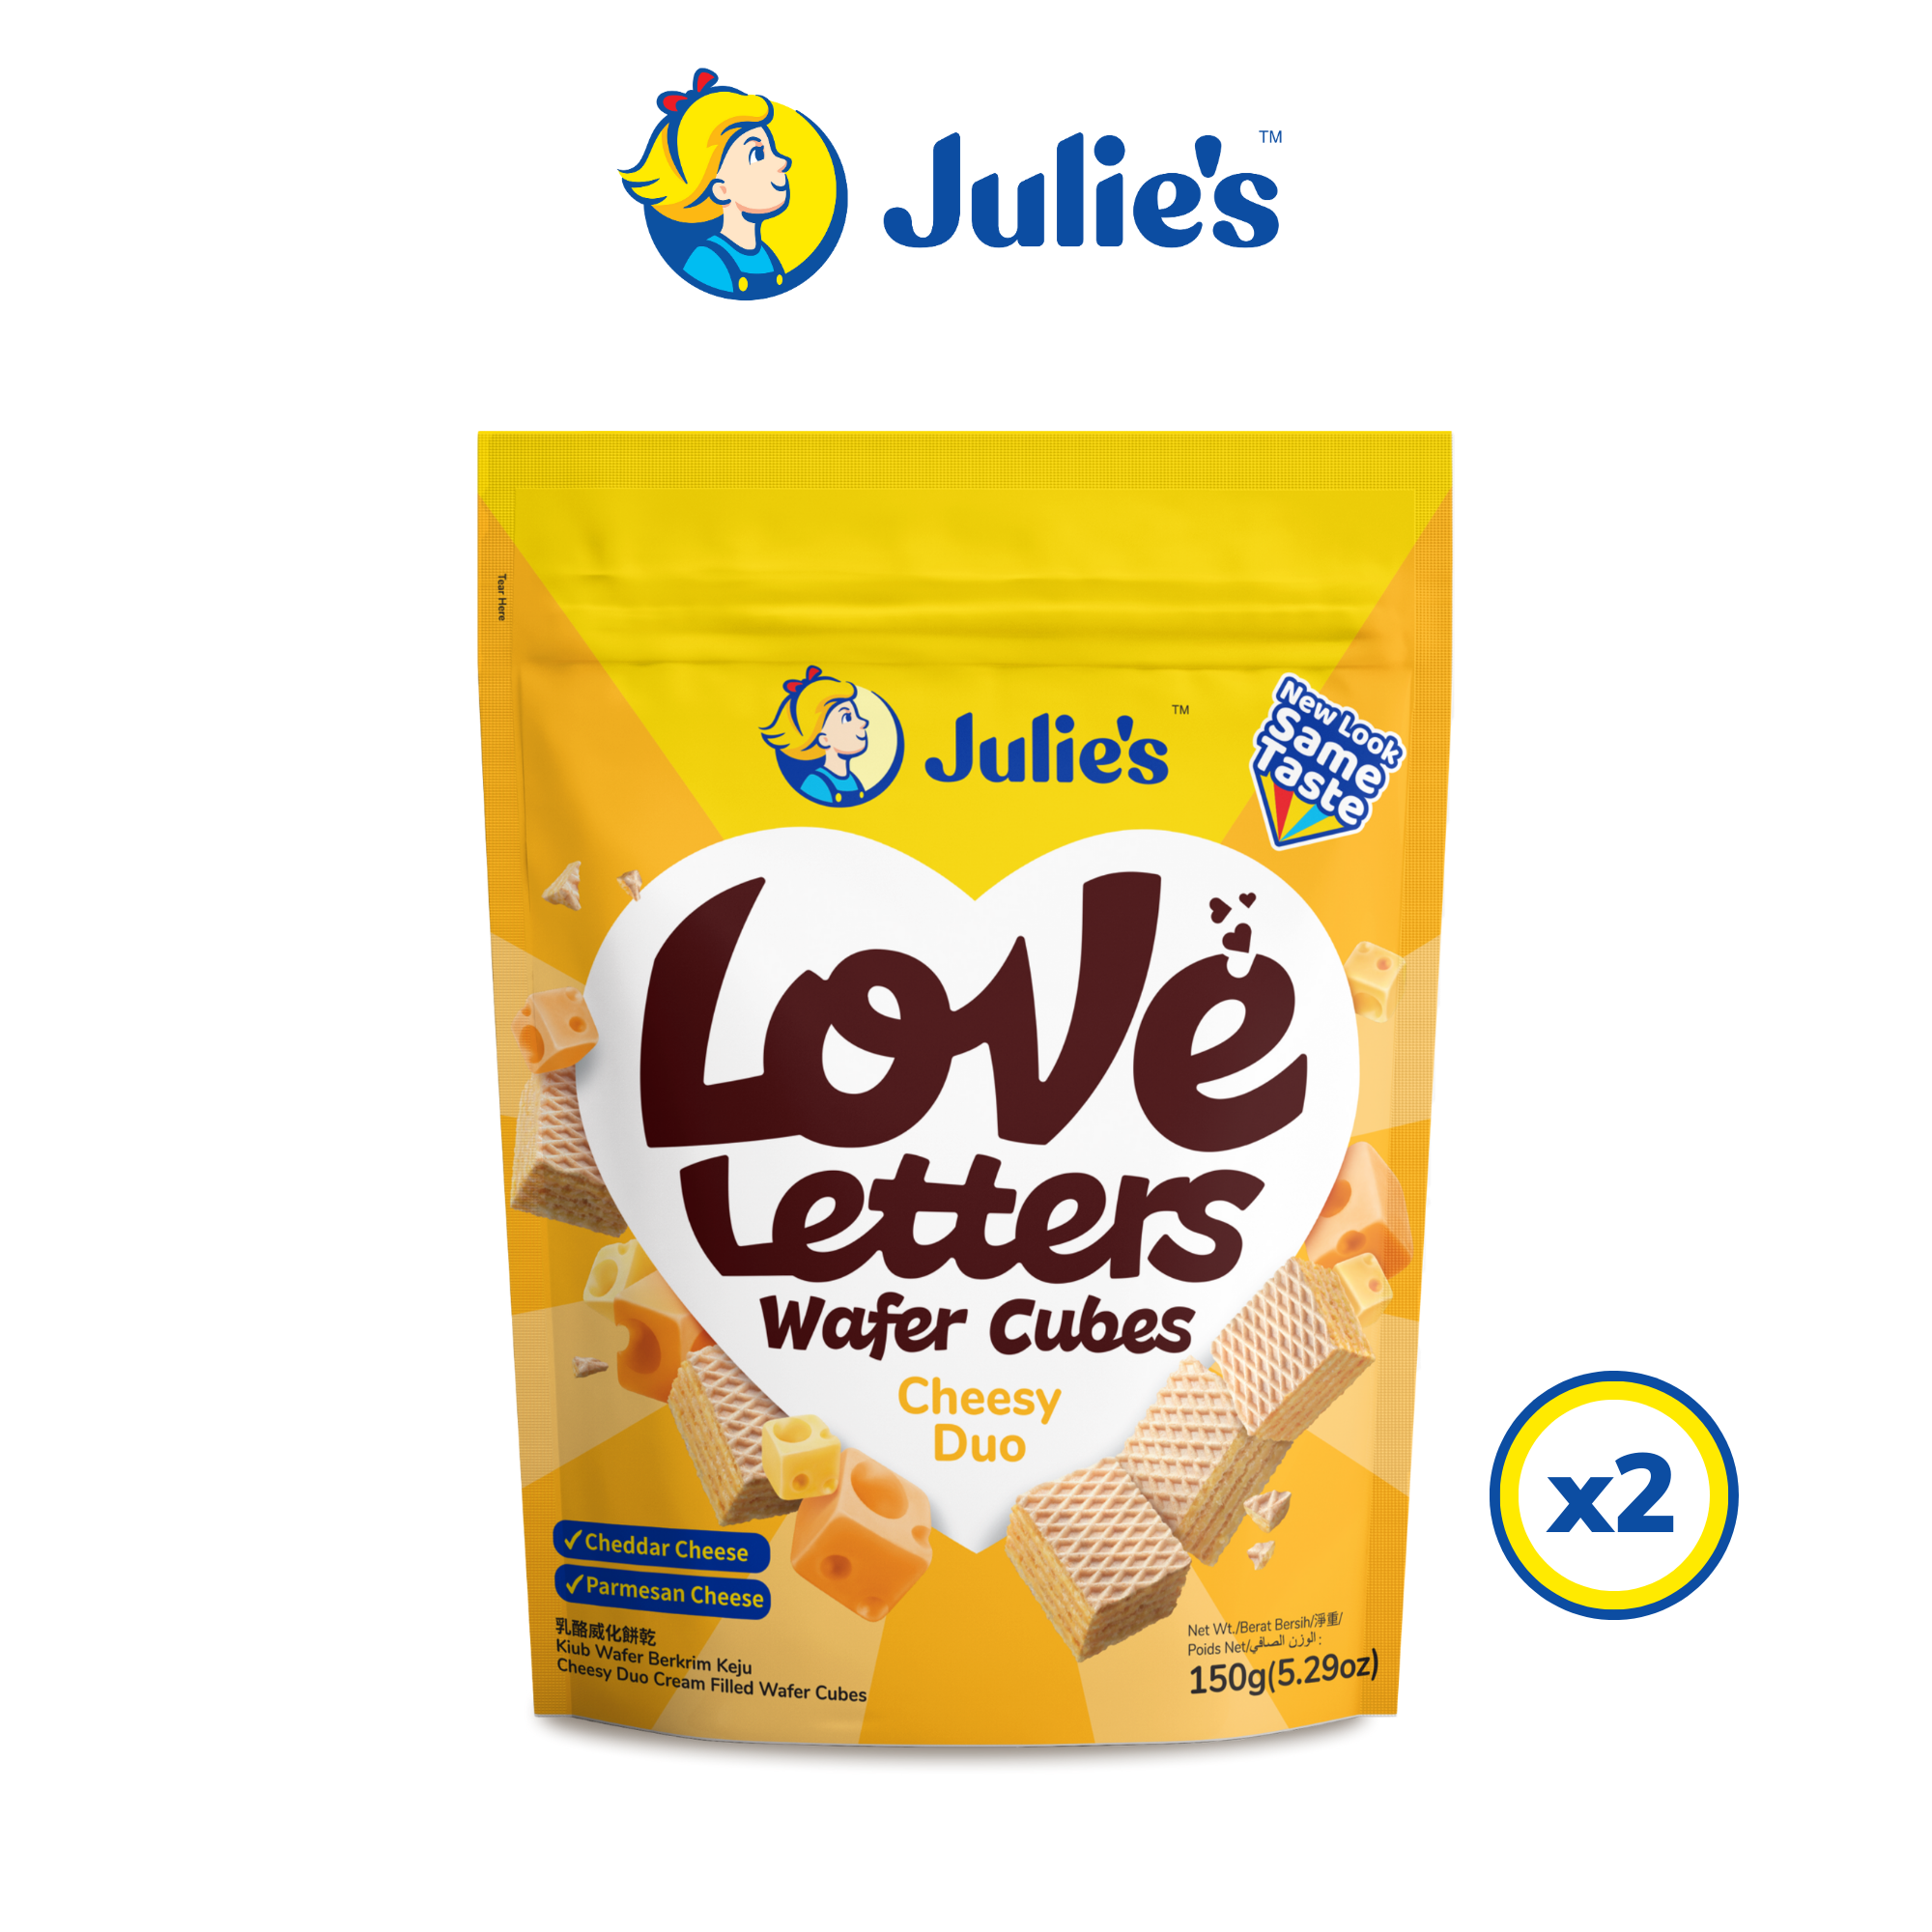 Julie\'s Love Letters Wafer Cubes Cheesy Duo 150g x 2 packs